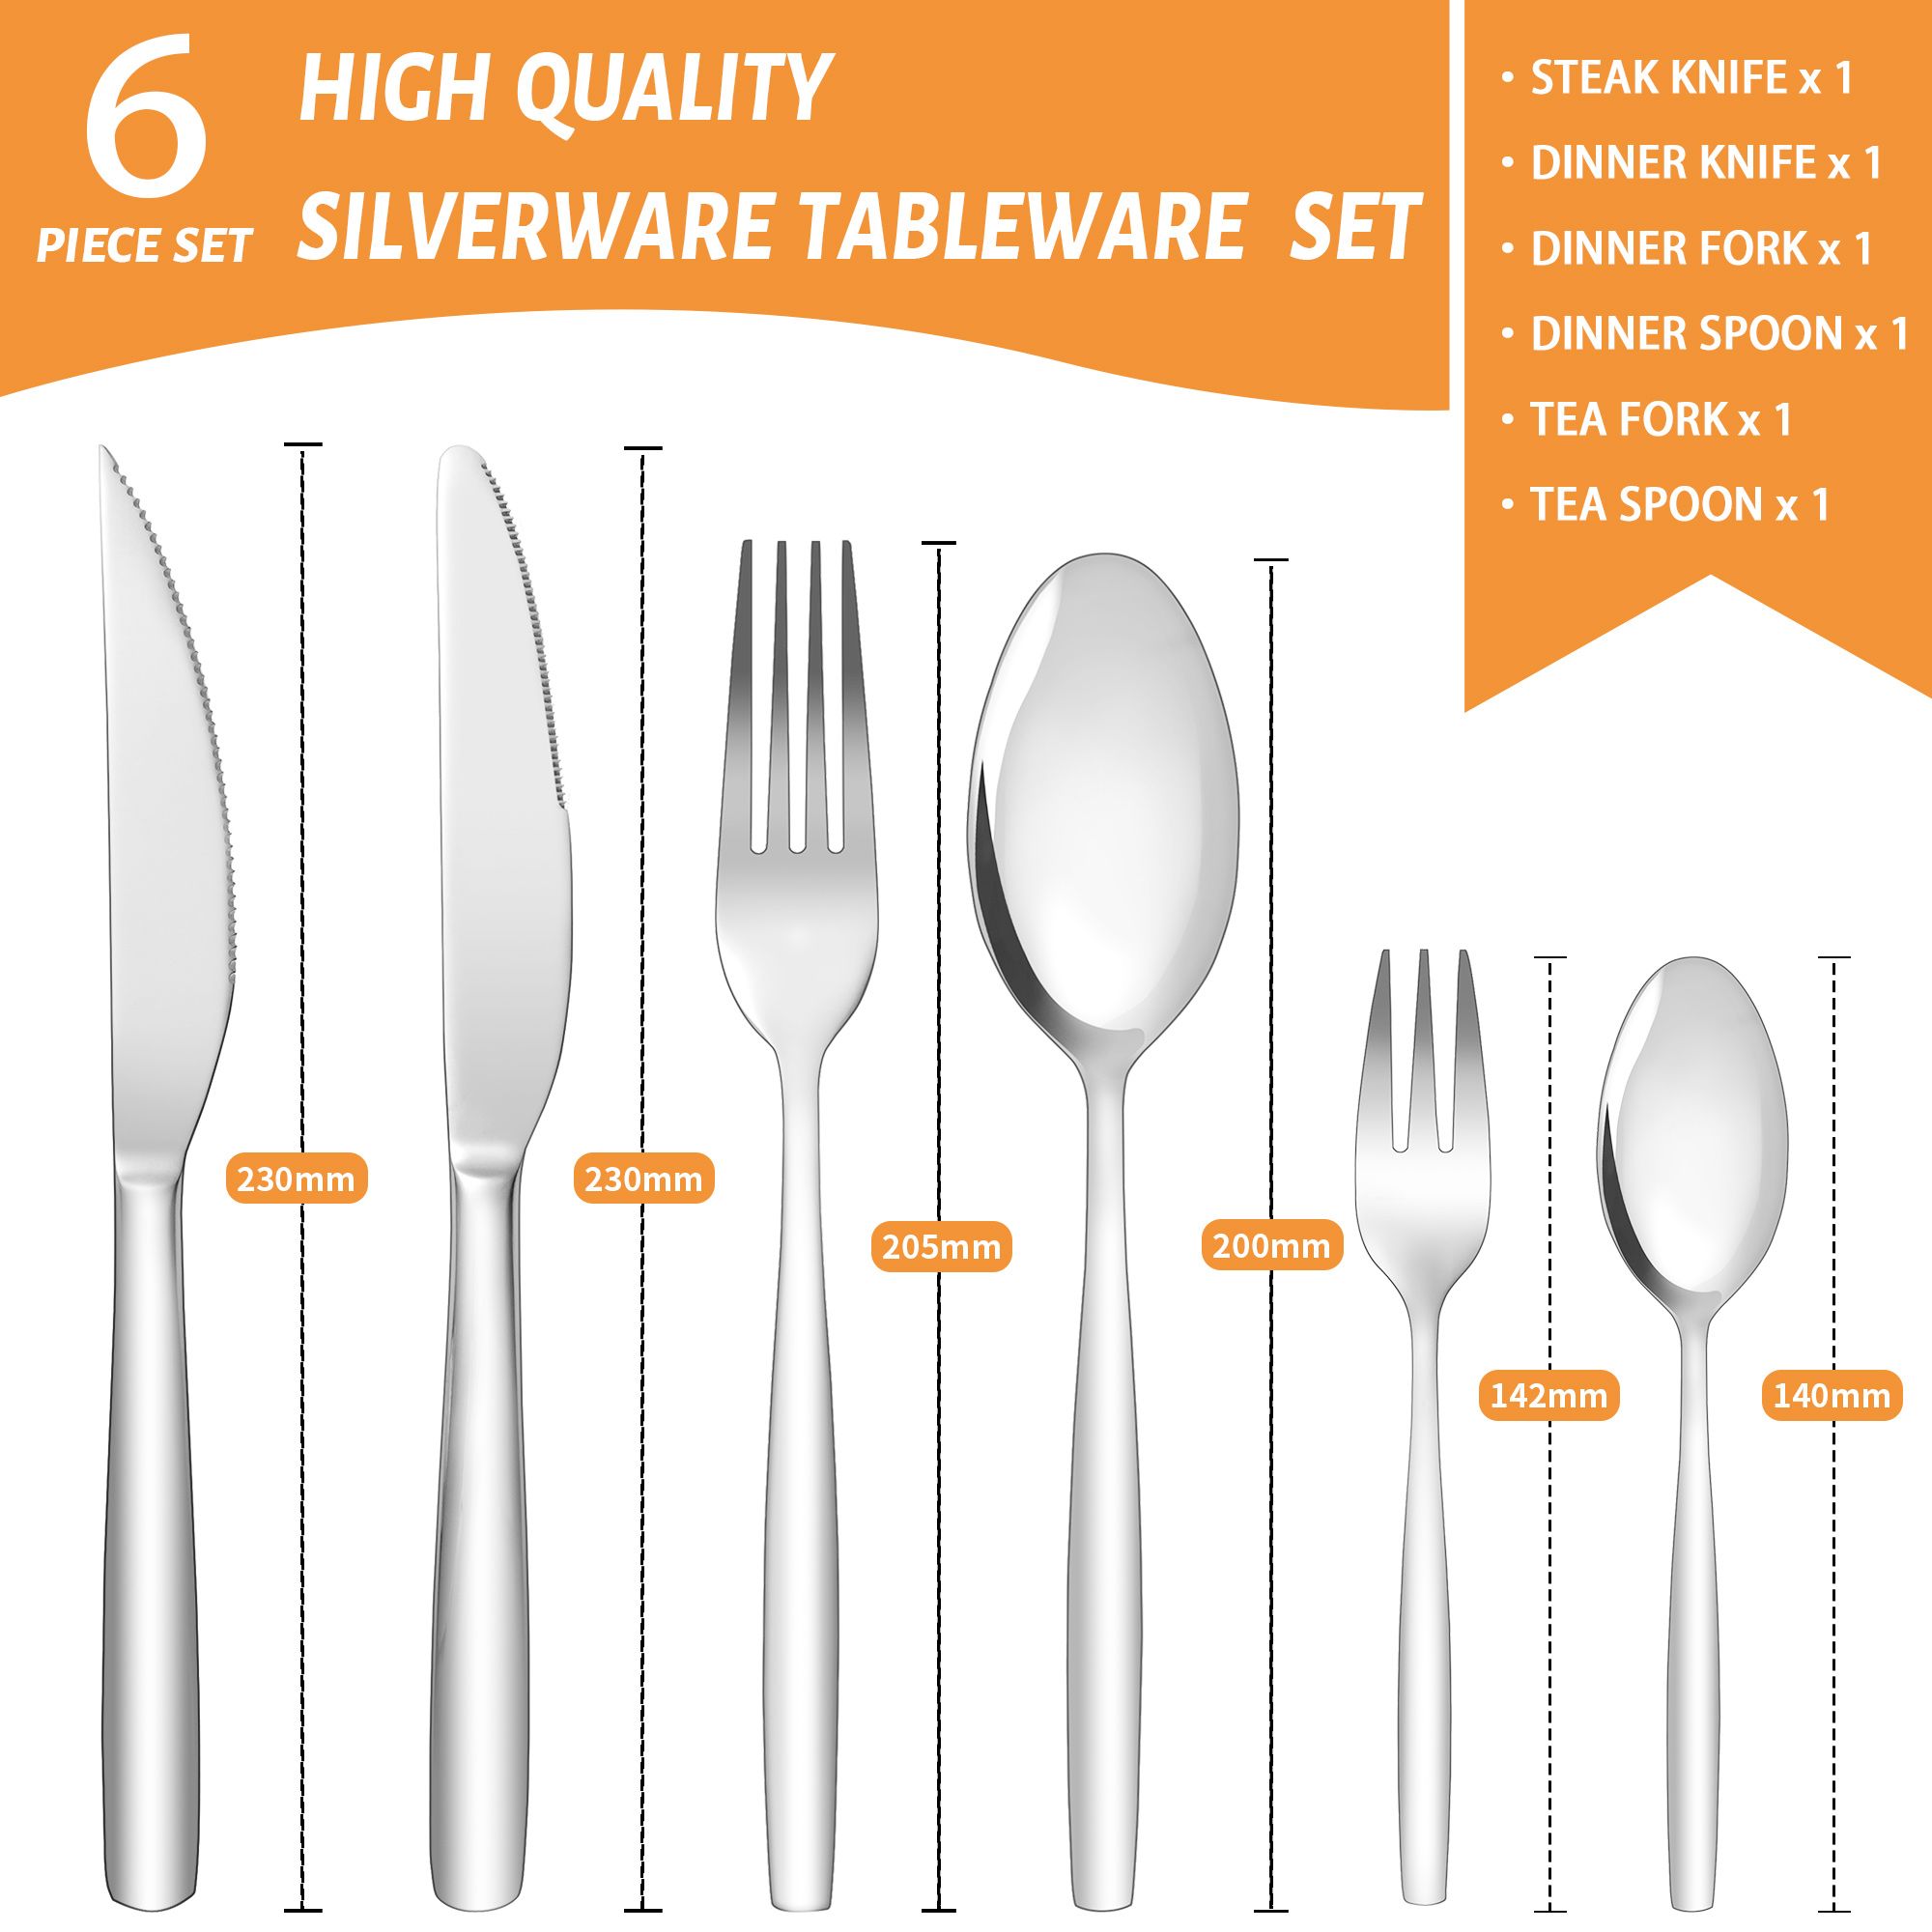 Stainless Steel Cutlery Set with Steak Knife, Elegant Cutlery Set with Knife, Fork, Spoon, Dishwasher Safe